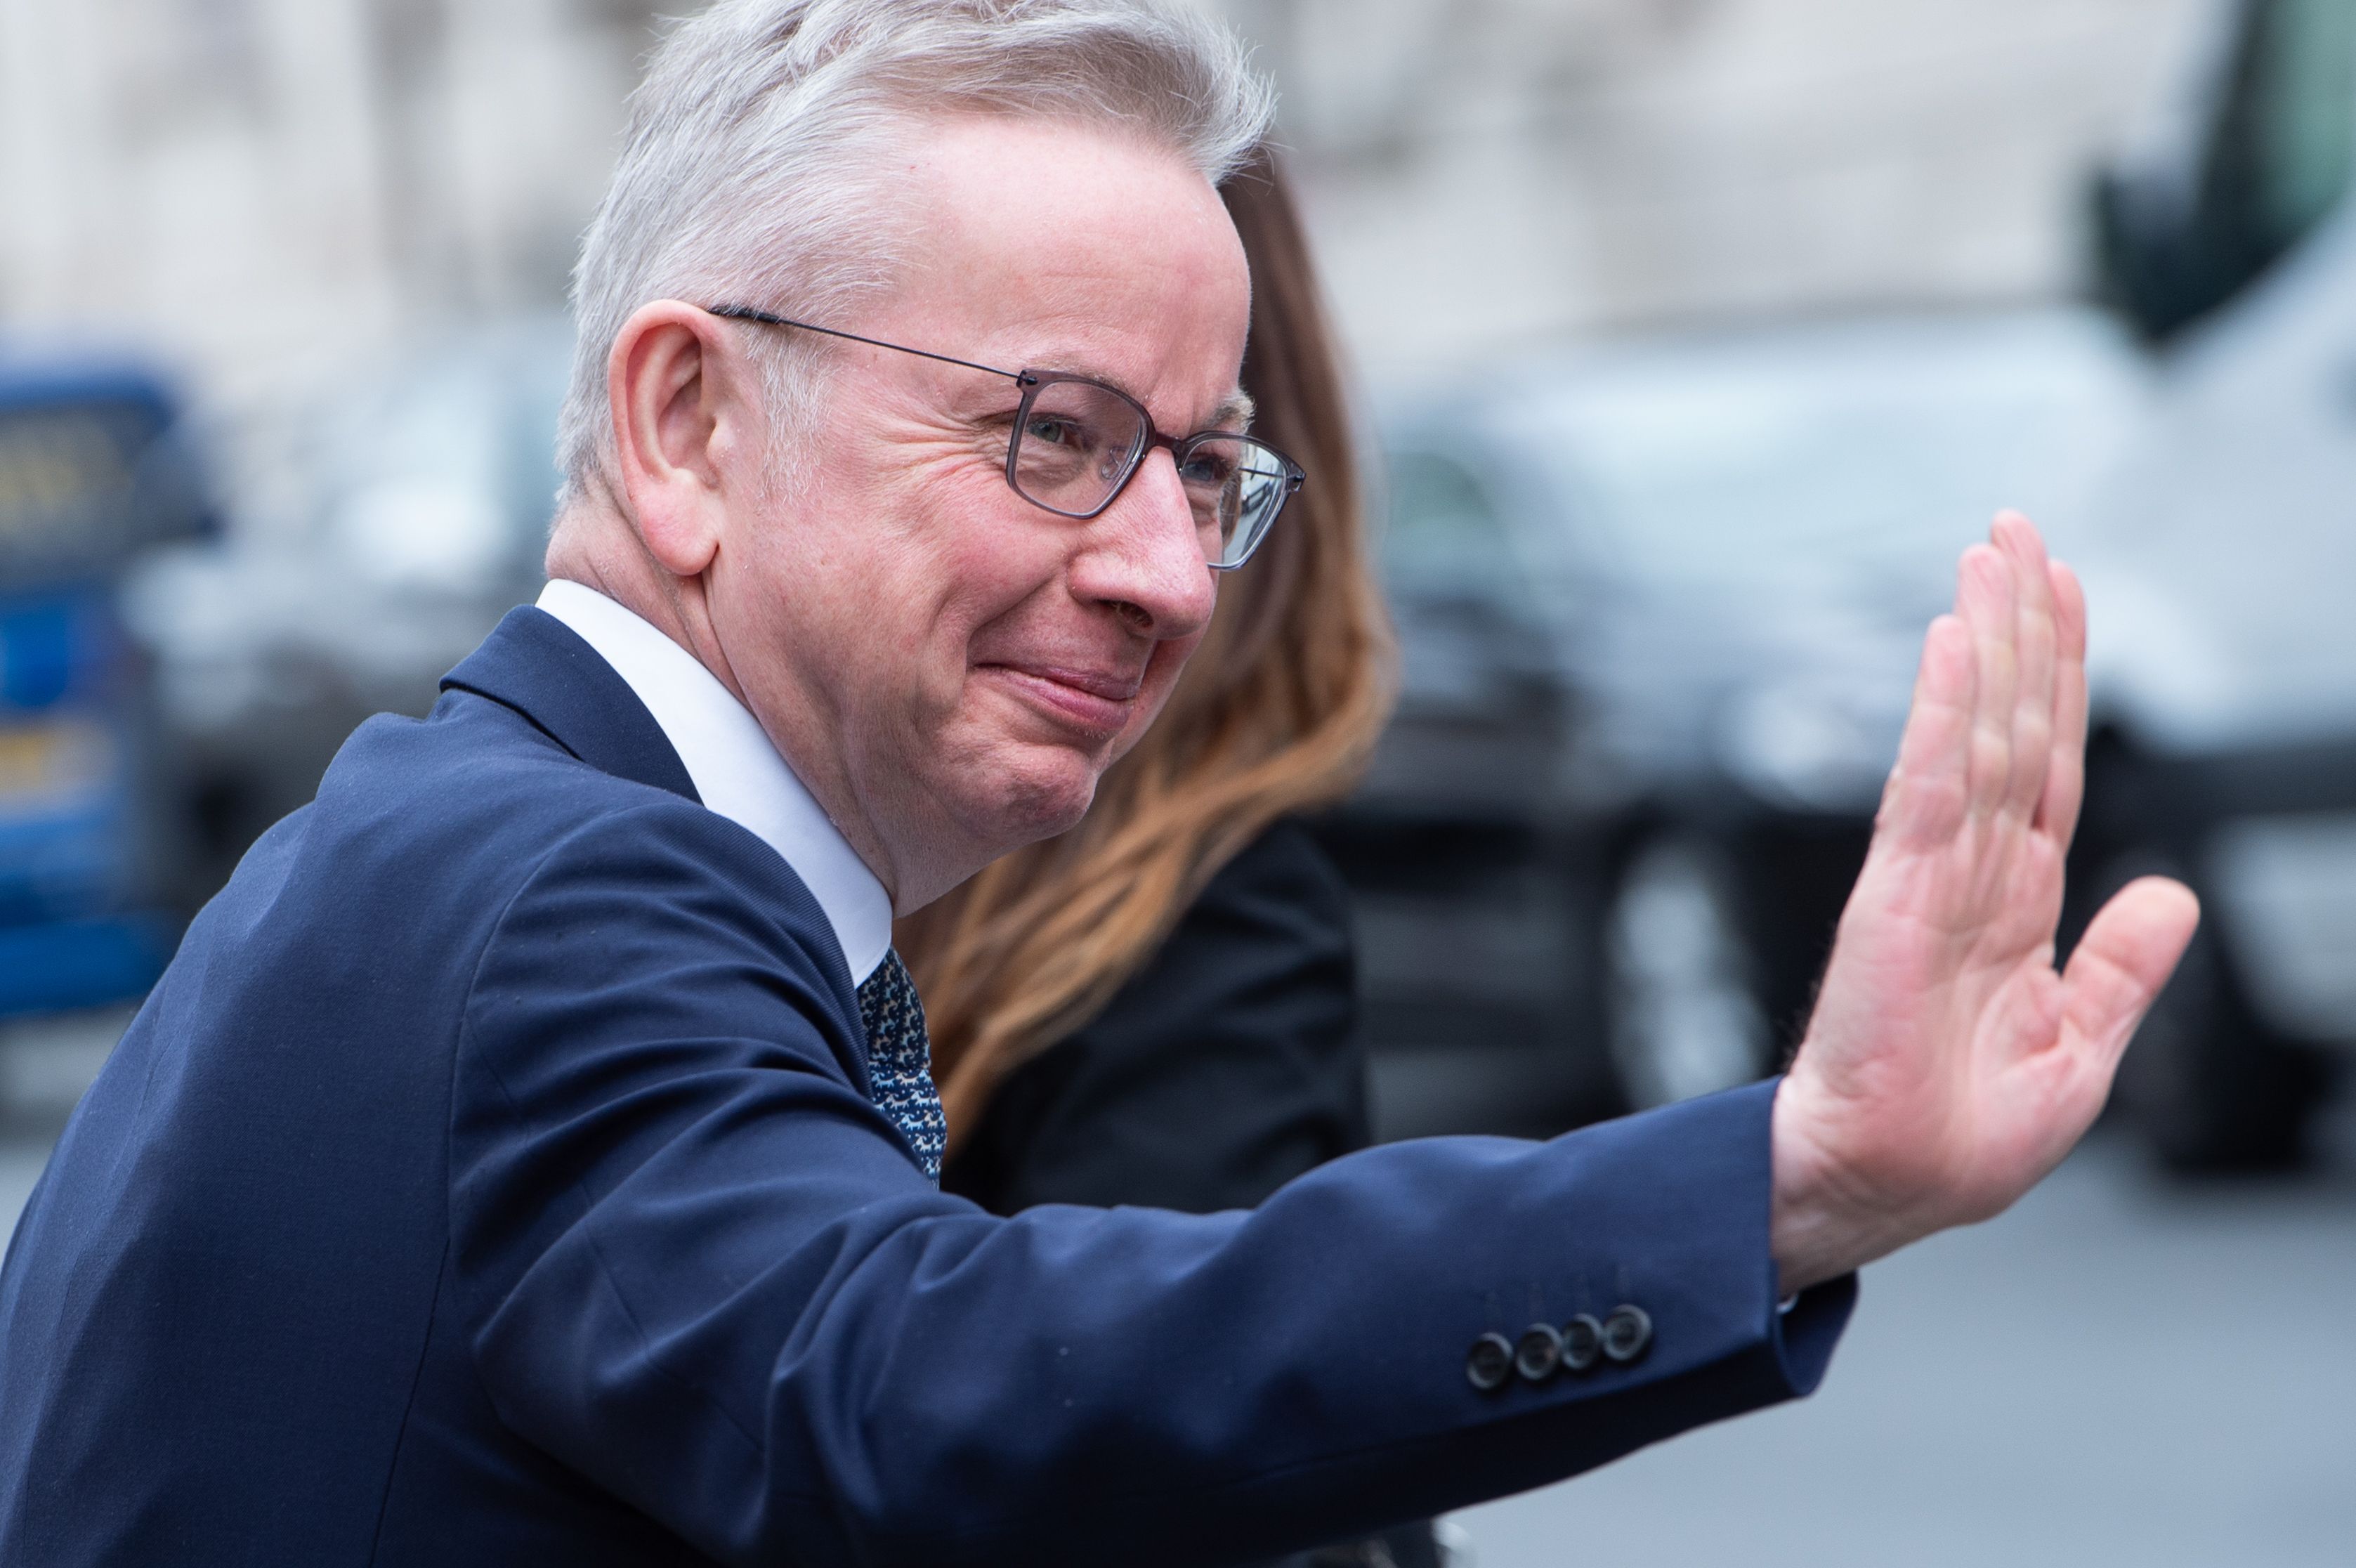 Housing secretary Michael Gove’s bill will outlaw ‘no-fault’ evictions only for new tenancies